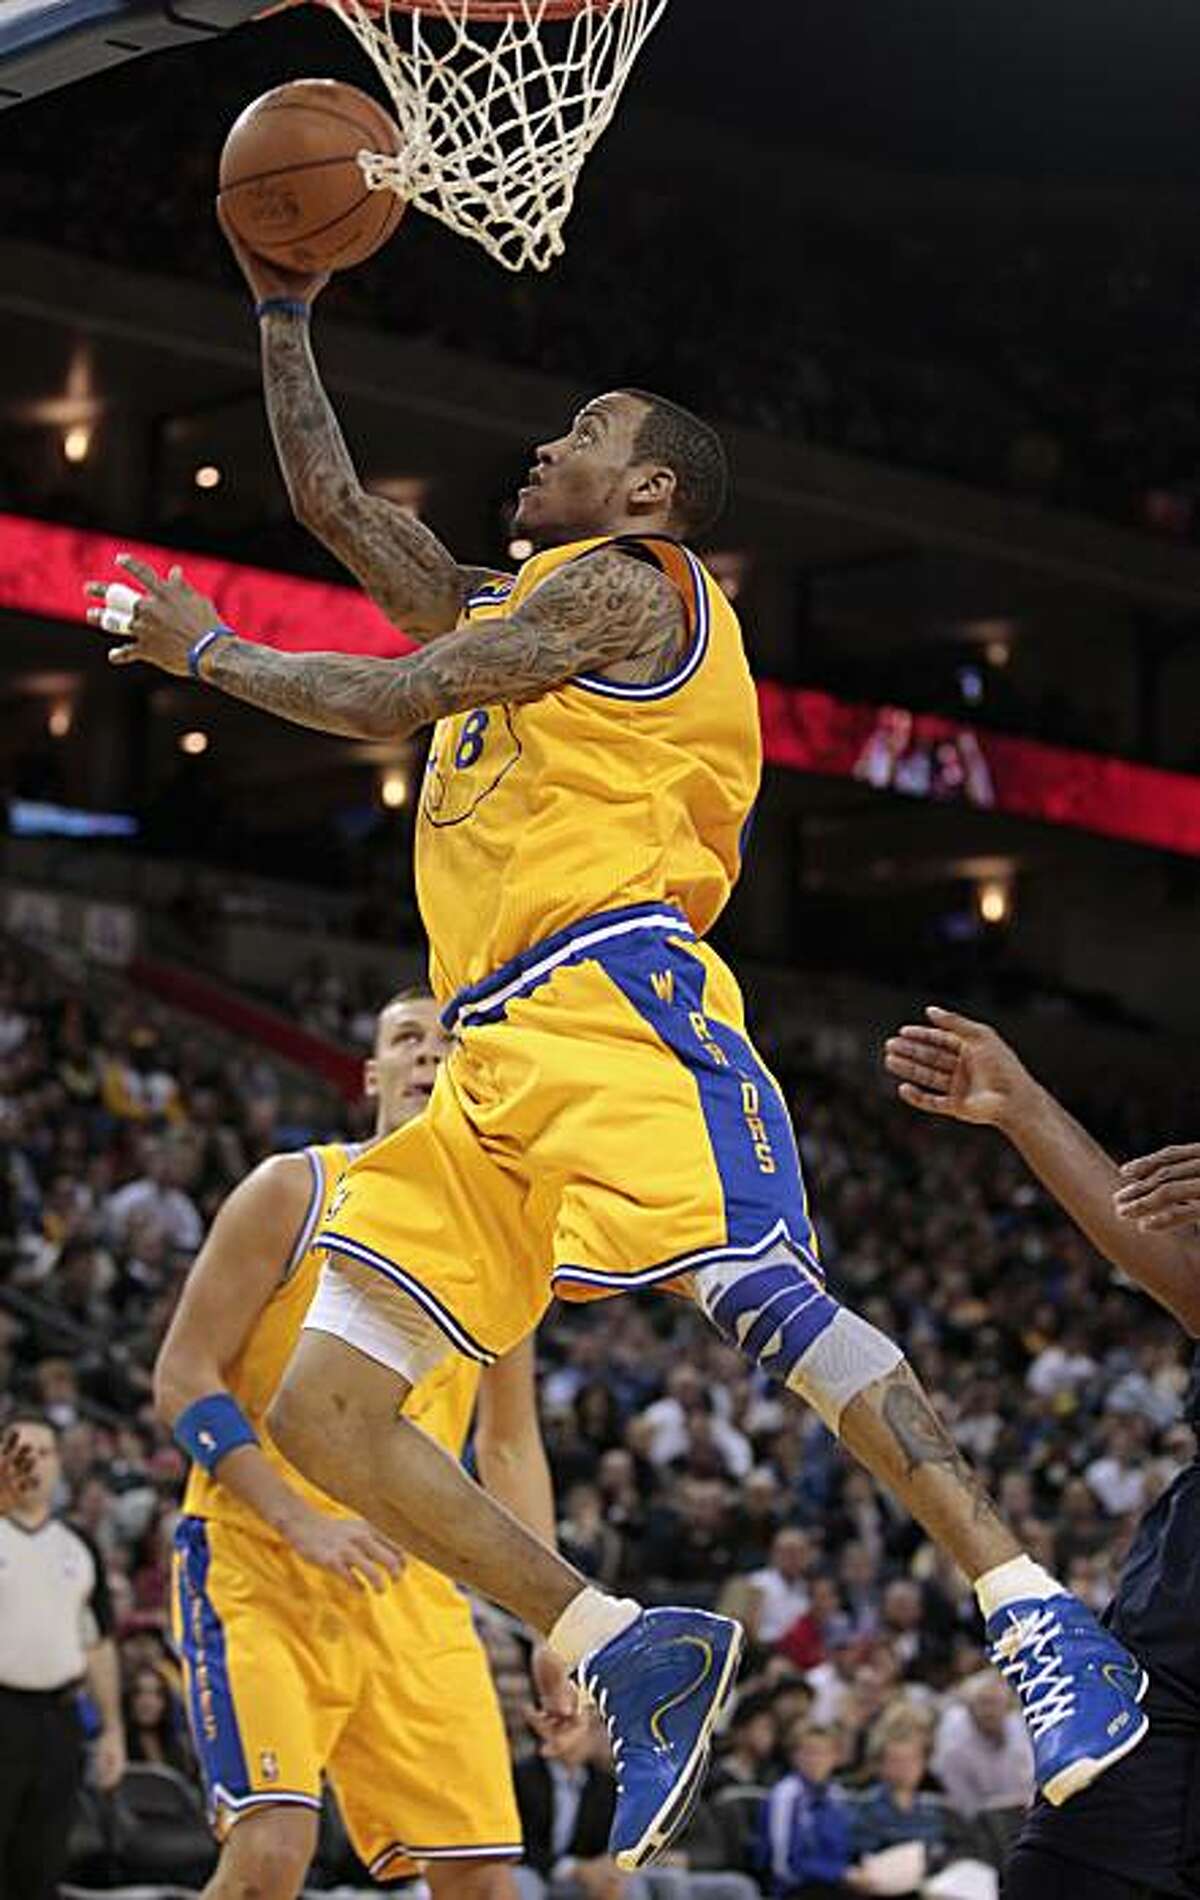 Golden State Warriors guard Monta Ellis (8) shoots against the Denver Nuggets in the third quarter of an NBA basketball game in Oakland, Calif., Wednesday, Feb. 9, 2011.